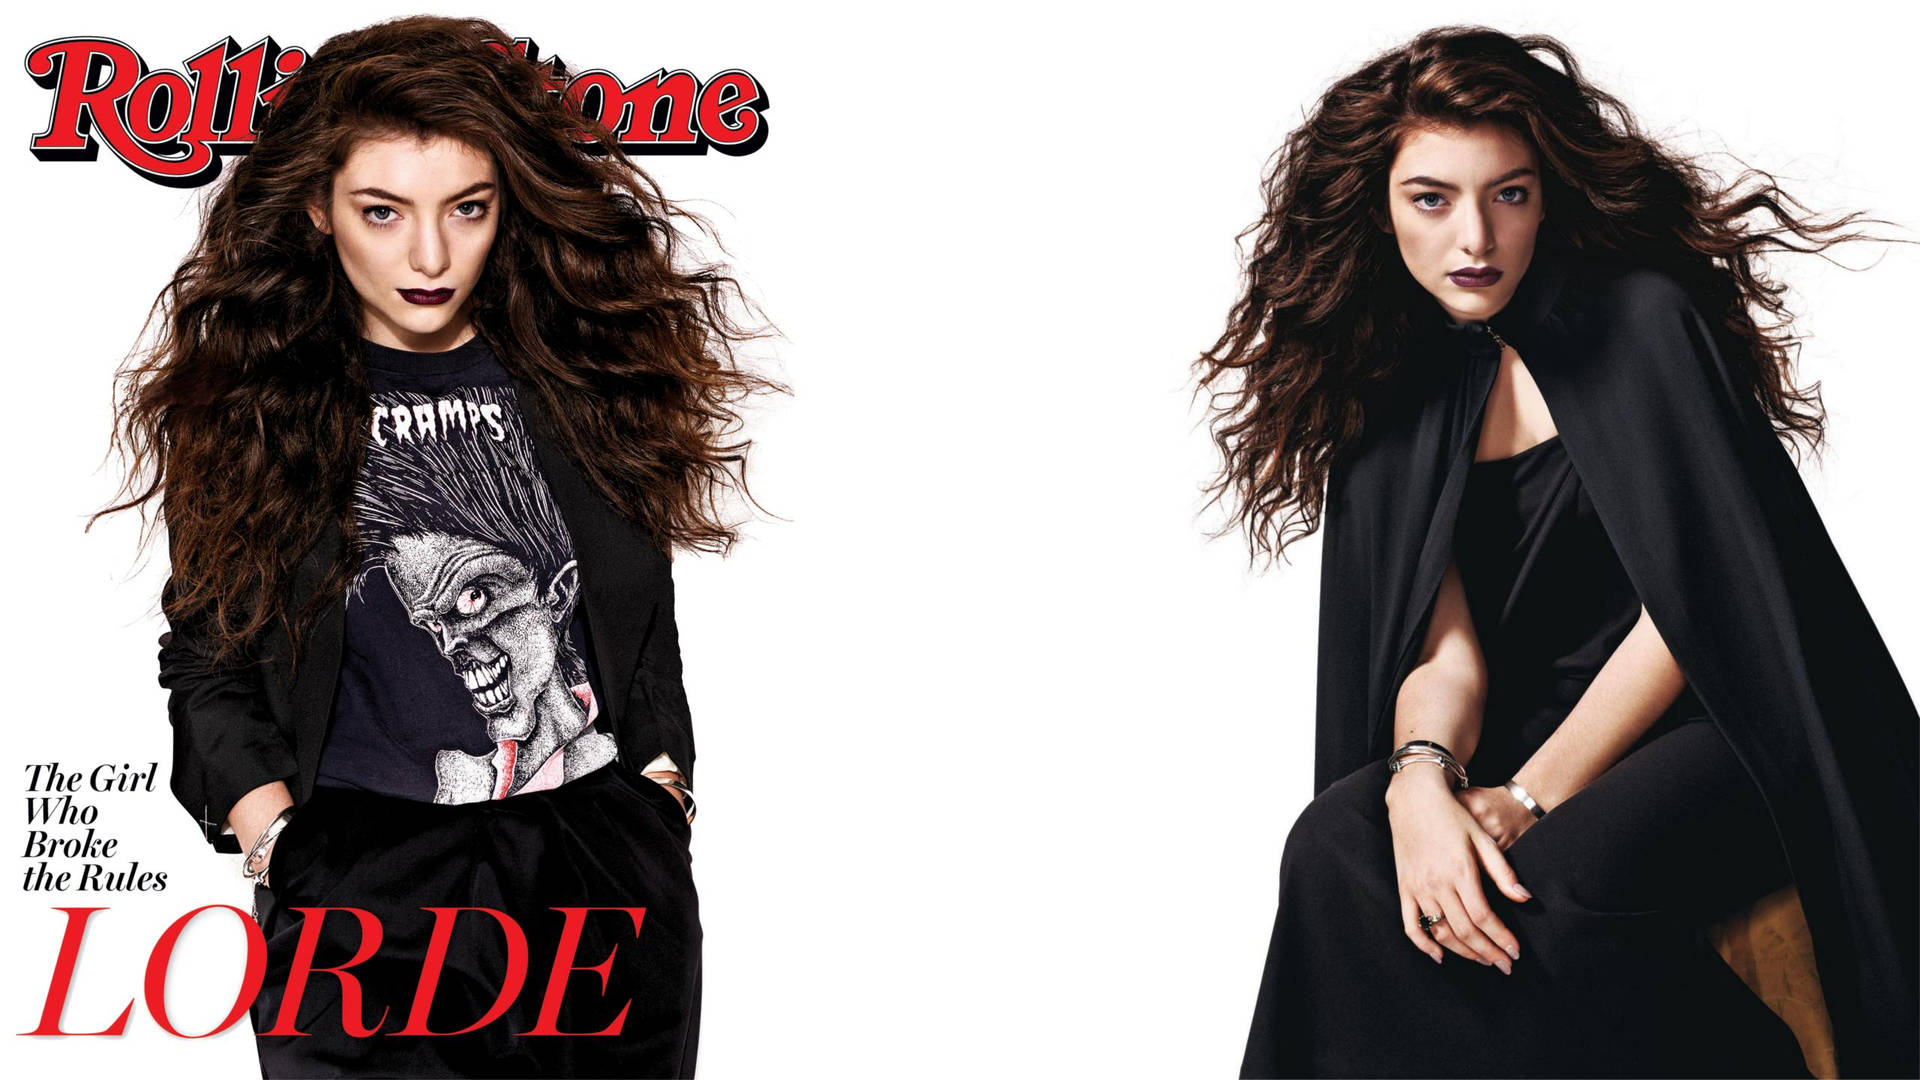 Dual Lorde Rolling Stone Shoot Background